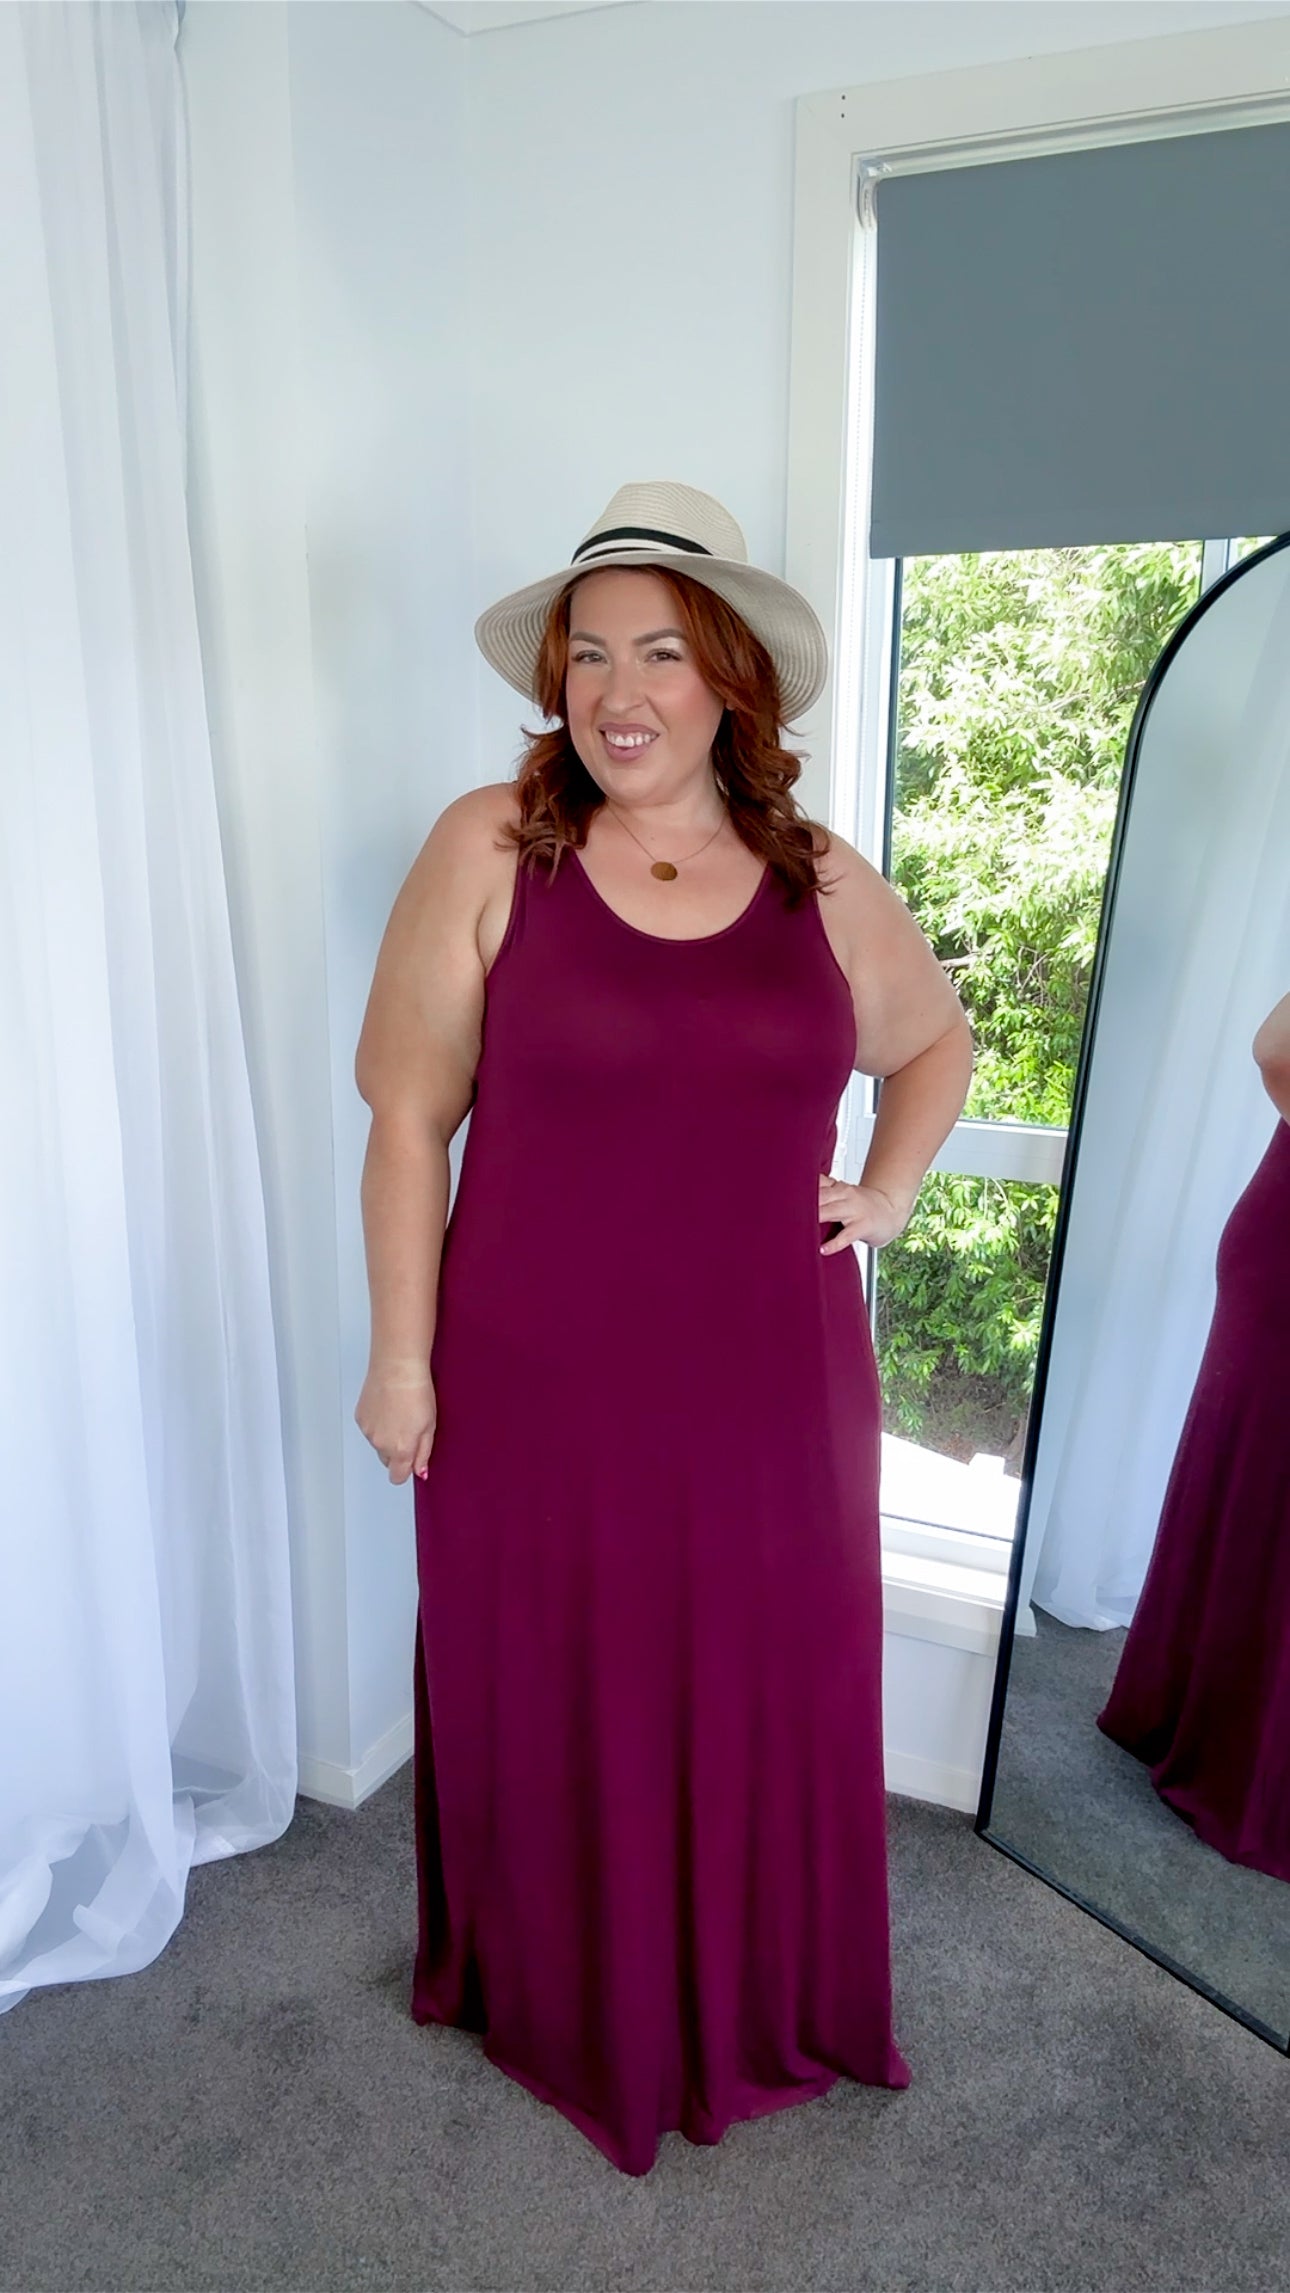 2024* 20 INSTANT clothing tips that flatter plus-size figures!